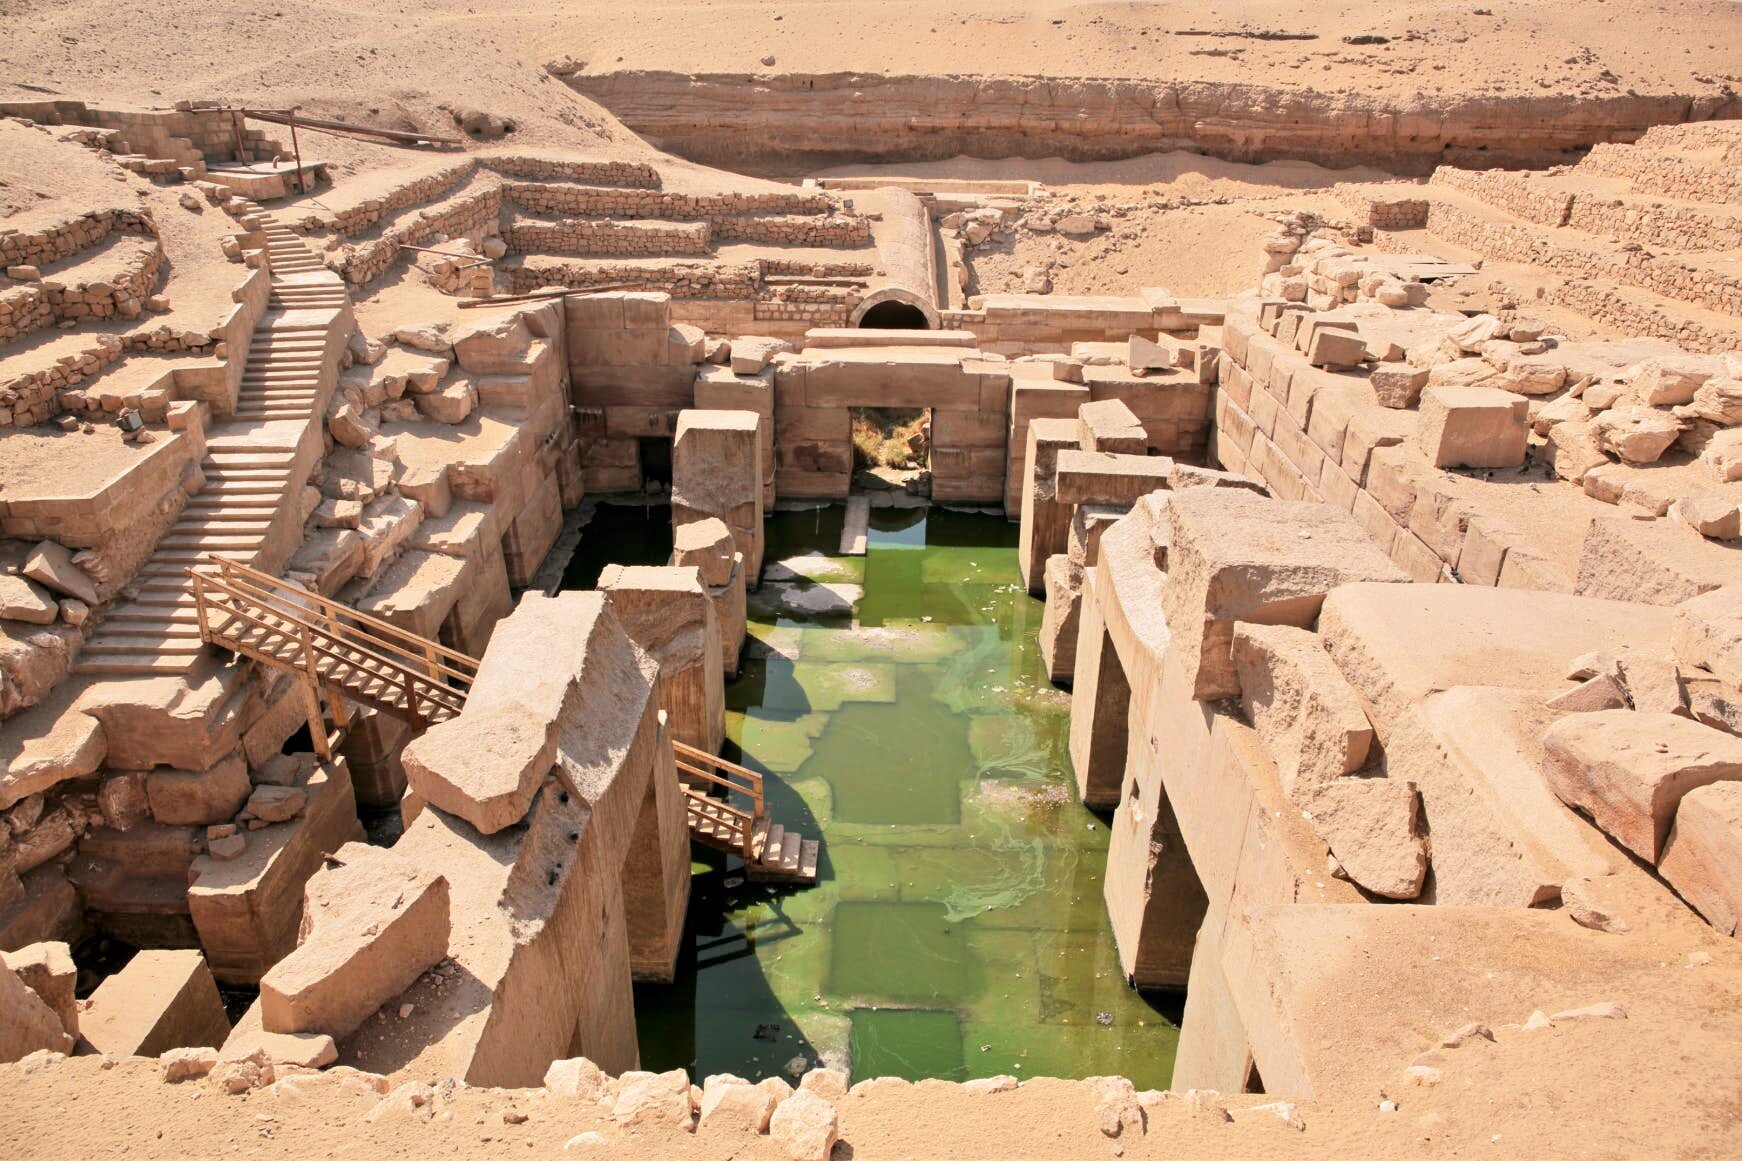 The 'Osireion' Temple at Abydos: A unique structure which simulates an island